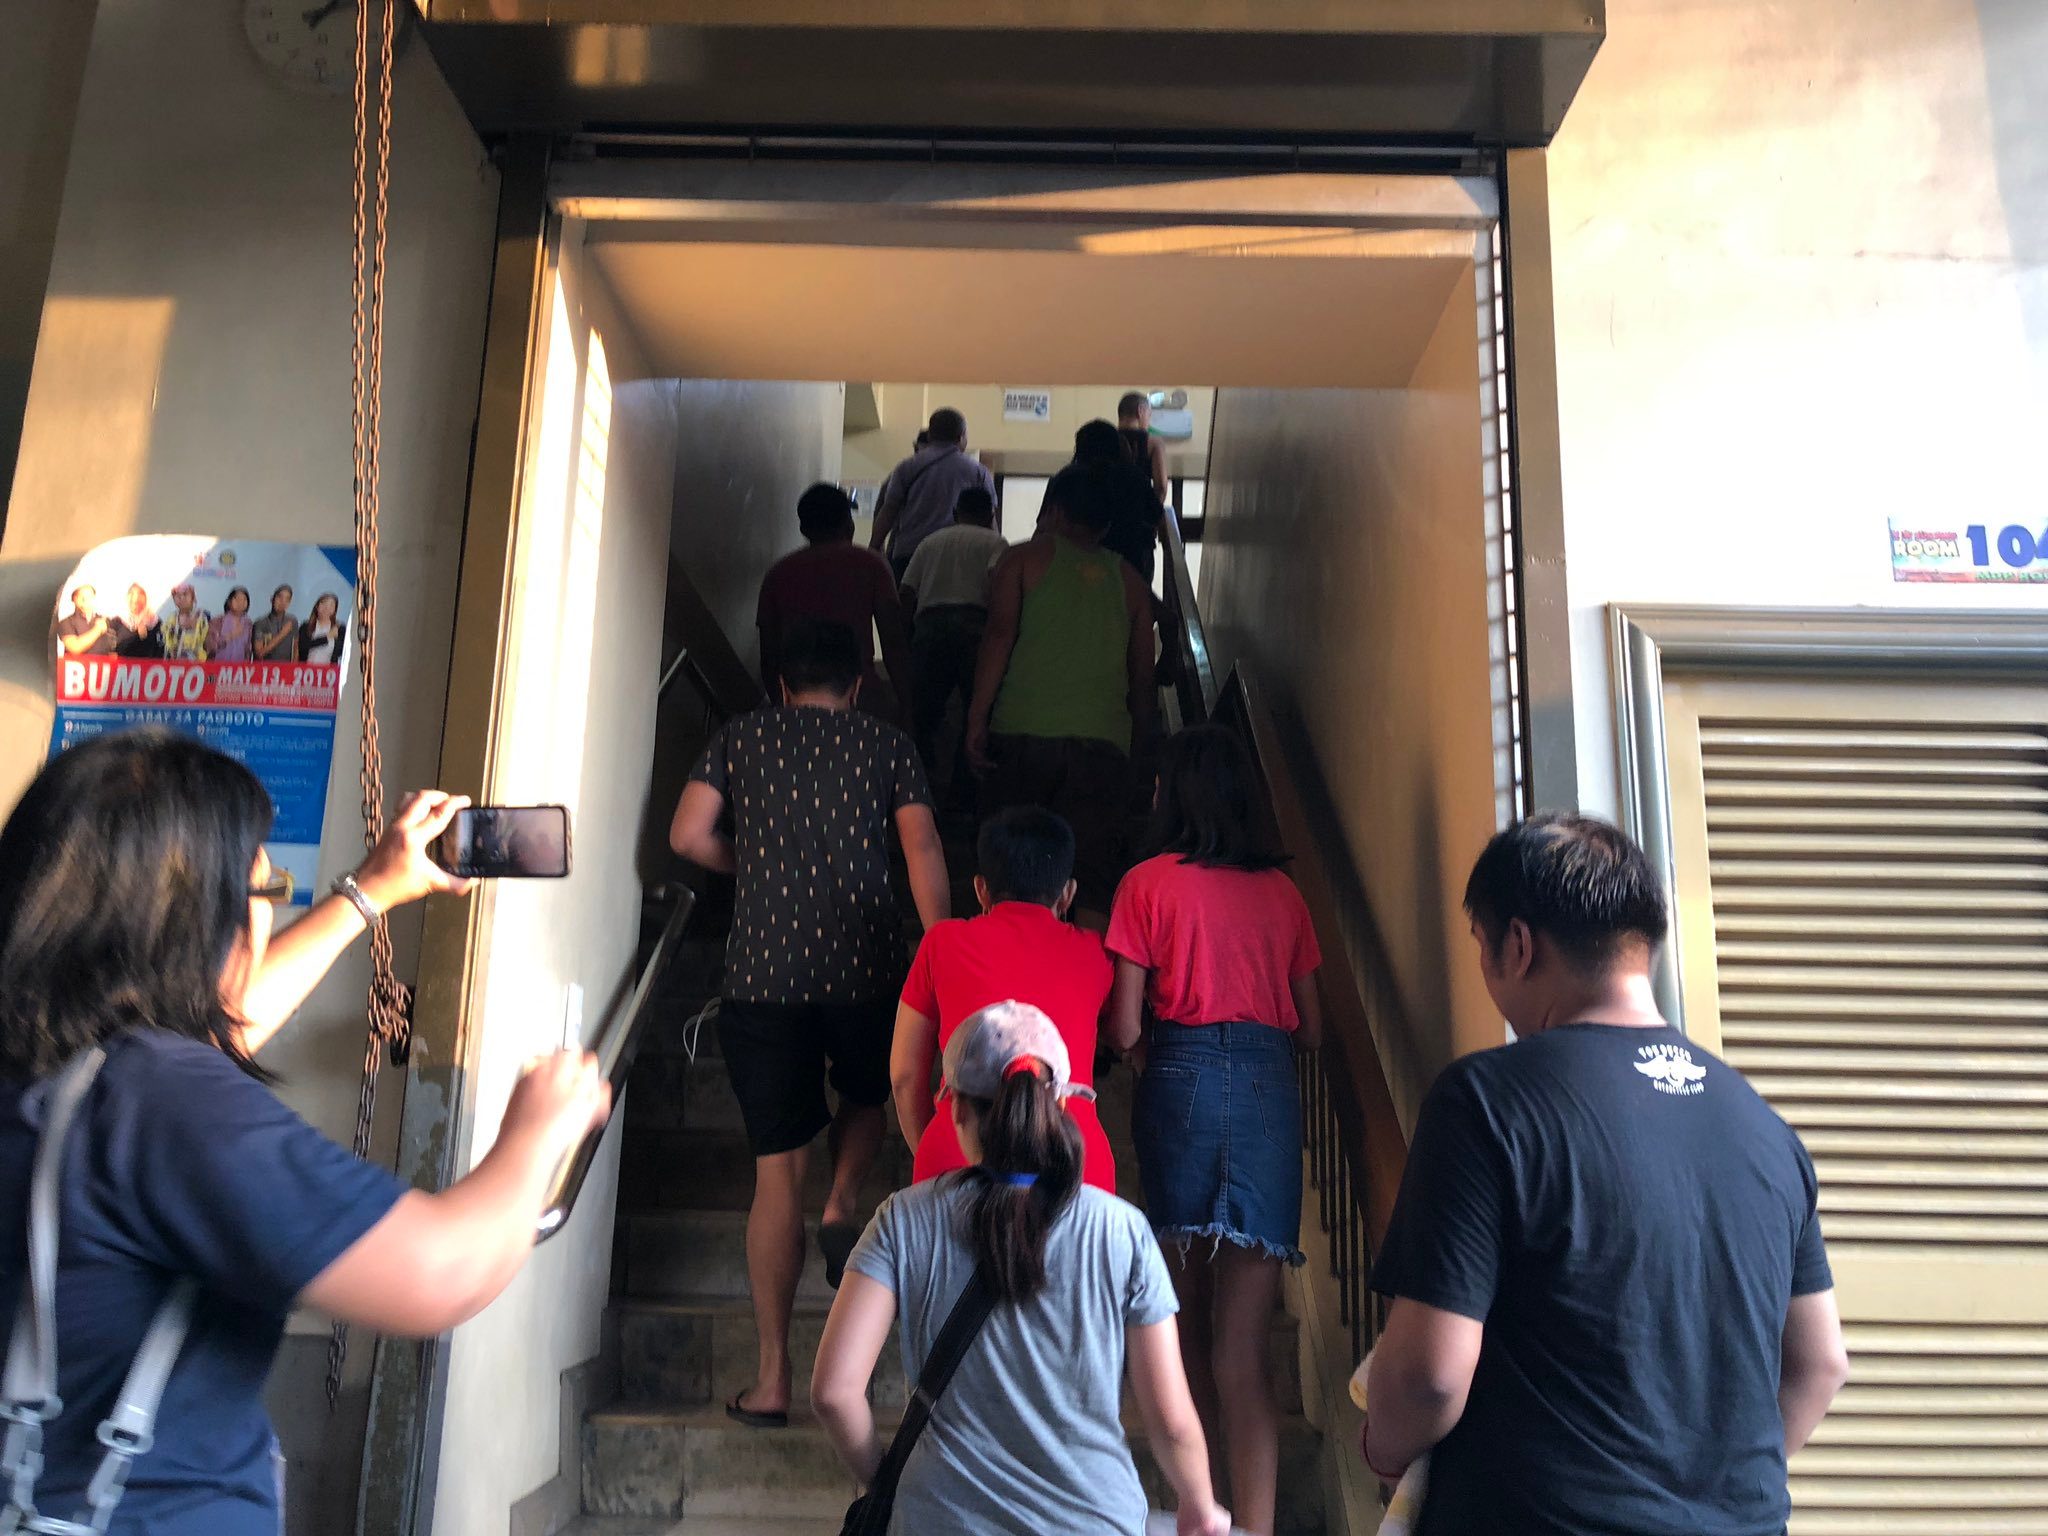 MAKATI. The first batch of voters enters the San Antonio National High School in Makati as the polling precinct opens. Photo by Mara Cepeda/Rappler   